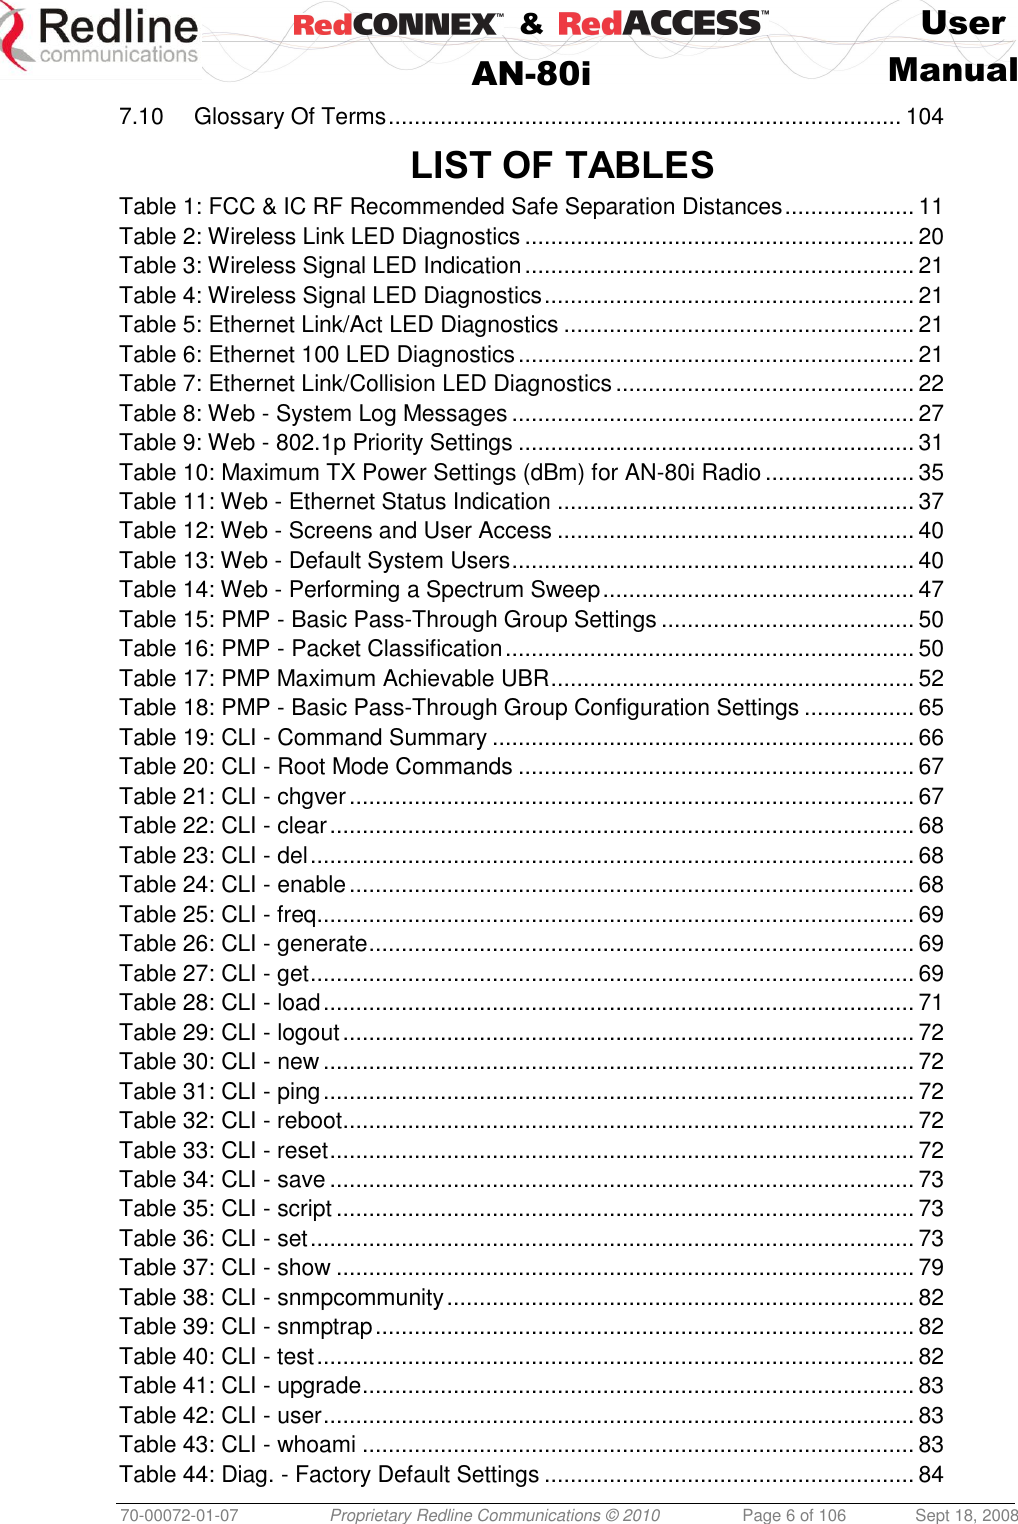    &amp;  User  AN-80i Manual  70-00072-01-07 Proprietary Redline Communications © 2010  Page 6 of 106  Sept 18, 2008 7.10 Glossary Of Terms ............................................................................... 104  LIST OF TABLES Table 1: FCC &amp; IC RF Recommended Safe Separation Distances .................... 11 Table 2: Wireless Link LED Diagnostics ............................................................ 20 Table 3: Wireless Signal LED Indication ............................................................ 21 Table 4: Wireless Signal LED Diagnostics ......................................................... 21 Table 5: Ethernet Link/Act LED Diagnostics ...................................................... 21 Table 6: Ethernet 100 LED Diagnostics ............................................................. 21 Table 7: Ethernet Link/Collision LED Diagnostics .............................................. 22 Table 8: Web - System Log Messages .............................................................. 27 Table 9: Web - 802.1p Priority Settings ............................................................. 31 Table 10: Maximum TX Power Settings (dBm) for AN-80i Radio ....................... 35 Table 11: Web - Ethernet Status Indication ....................................................... 37 Table 12: Web - Screens and User Access ....................................................... 40 Table 13: Web - Default System Users .............................................................. 40 Table 14: Web - Performing a Spectrum Sweep ................................................ 47 Table 15: PMP - Basic Pass-Through Group Settings ....................................... 50 Table 16: PMP - Packet Classification ............................................................... 50 Table 17: PMP Maximum Achievable UBR ........................................................ 52 Table 18: PMP - Basic Pass-Through Group Configuration Settings ................. 65 Table 19: CLI - Command Summary ................................................................. 66 Table 20: CLI - Root Mode Commands ............................................................. 67 Table 21: CLI - chgver ....................................................................................... 67 Table 22: CLI - clear .......................................................................................... 68 Table 23: CLI - del ............................................................................................. 68 Table 24: CLI - enable ....................................................................................... 68 Table 25: CLI - freq............................................................................................ 69 Table 26: CLI - generate .................................................................................... 69 Table 27: CLI - get ............................................................................................. 69 Table 28: CLI - load ........................................................................................... 71 Table 29: CLI - logout ........................................................................................ 72 Table 30: CLI - new ........................................................................................... 72 Table 31: CLI - ping ........................................................................................... 72 Table 32: CLI - reboot ........................................................................................ 72 Table 33: CLI - reset .......................................................................................... 72 Table 34: CLI - save .......................................................................................... 73 Table 35: CLI - script ......................................................................................... 73 Table 36: CLI - set ............................................................................................. 73 Table 37: CLI - show ......................................................................................... 79 Table 38: CLI - snmpcommunity ........................................................................ 82 Table 39: CLI - snmptrap ................................................................................... 82 Table 40: CLI - test ............................................................................................ 82 Table 41: CLI - upgrade ..................................................................................... 83 Table 42: CLI - user ........................................................................................... 83 Table 43: CLI - whoami ..................................................................................... 83 Table 44: Diag. - Factory Default Settings ......................................................... 84 